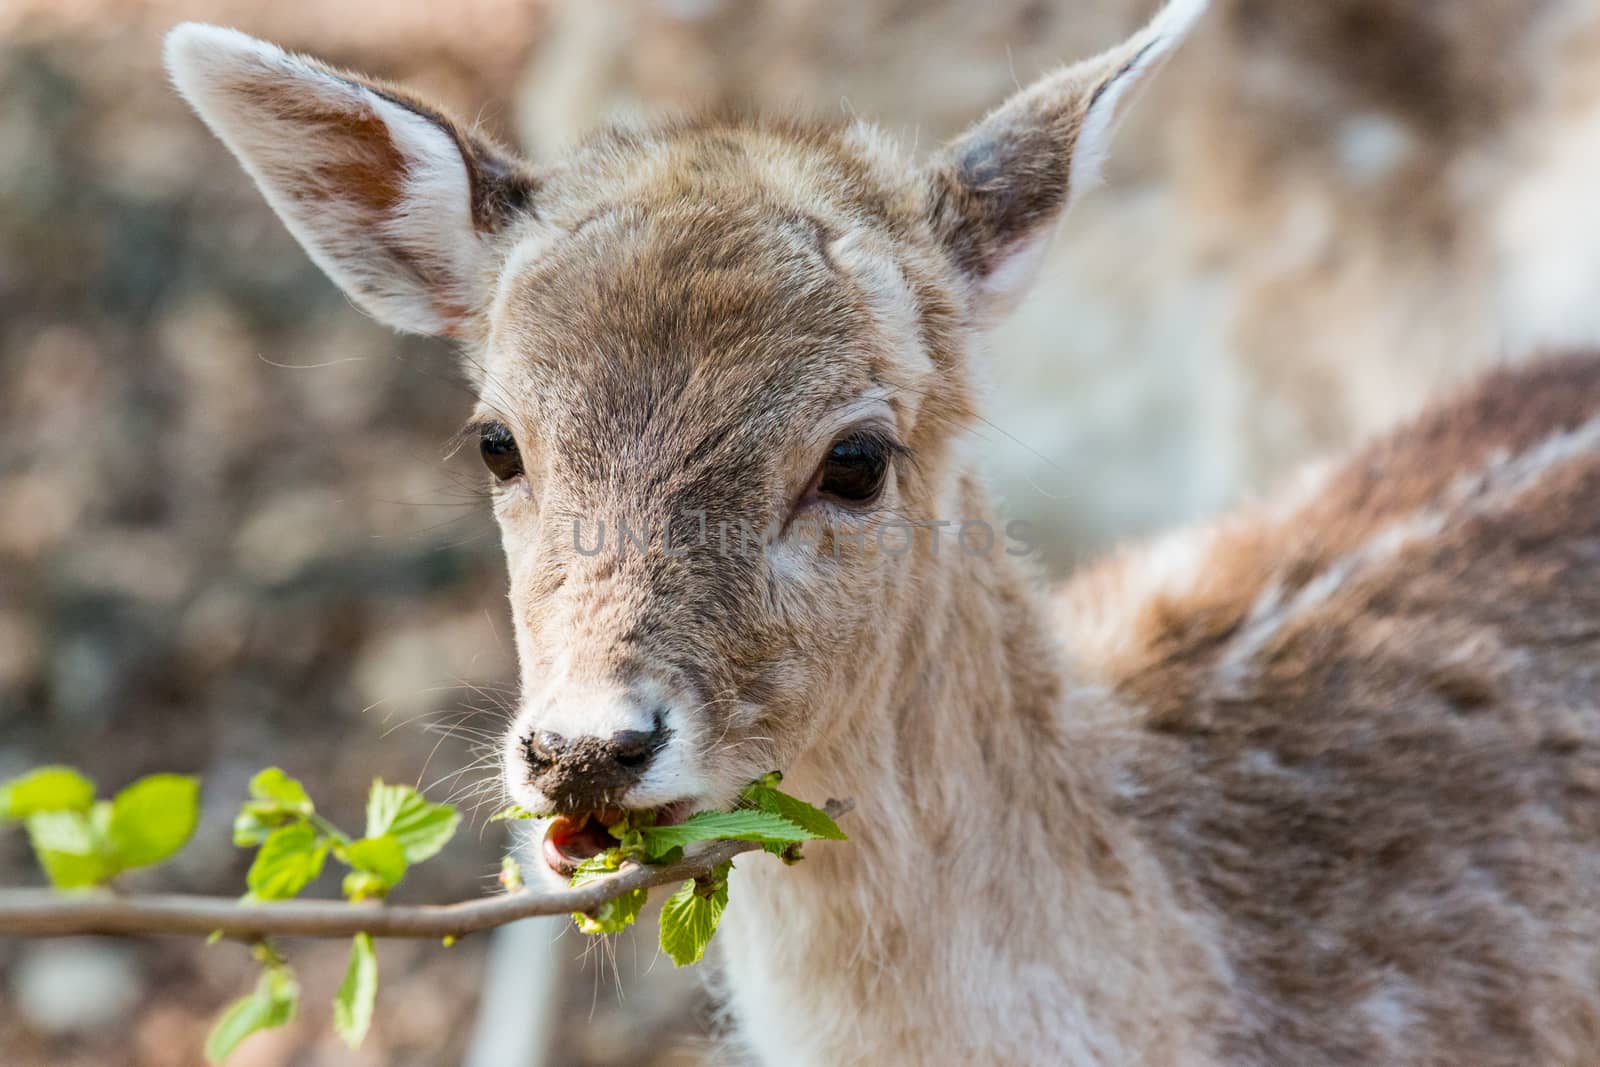 A little Fawn looking at the camera and eating leaves